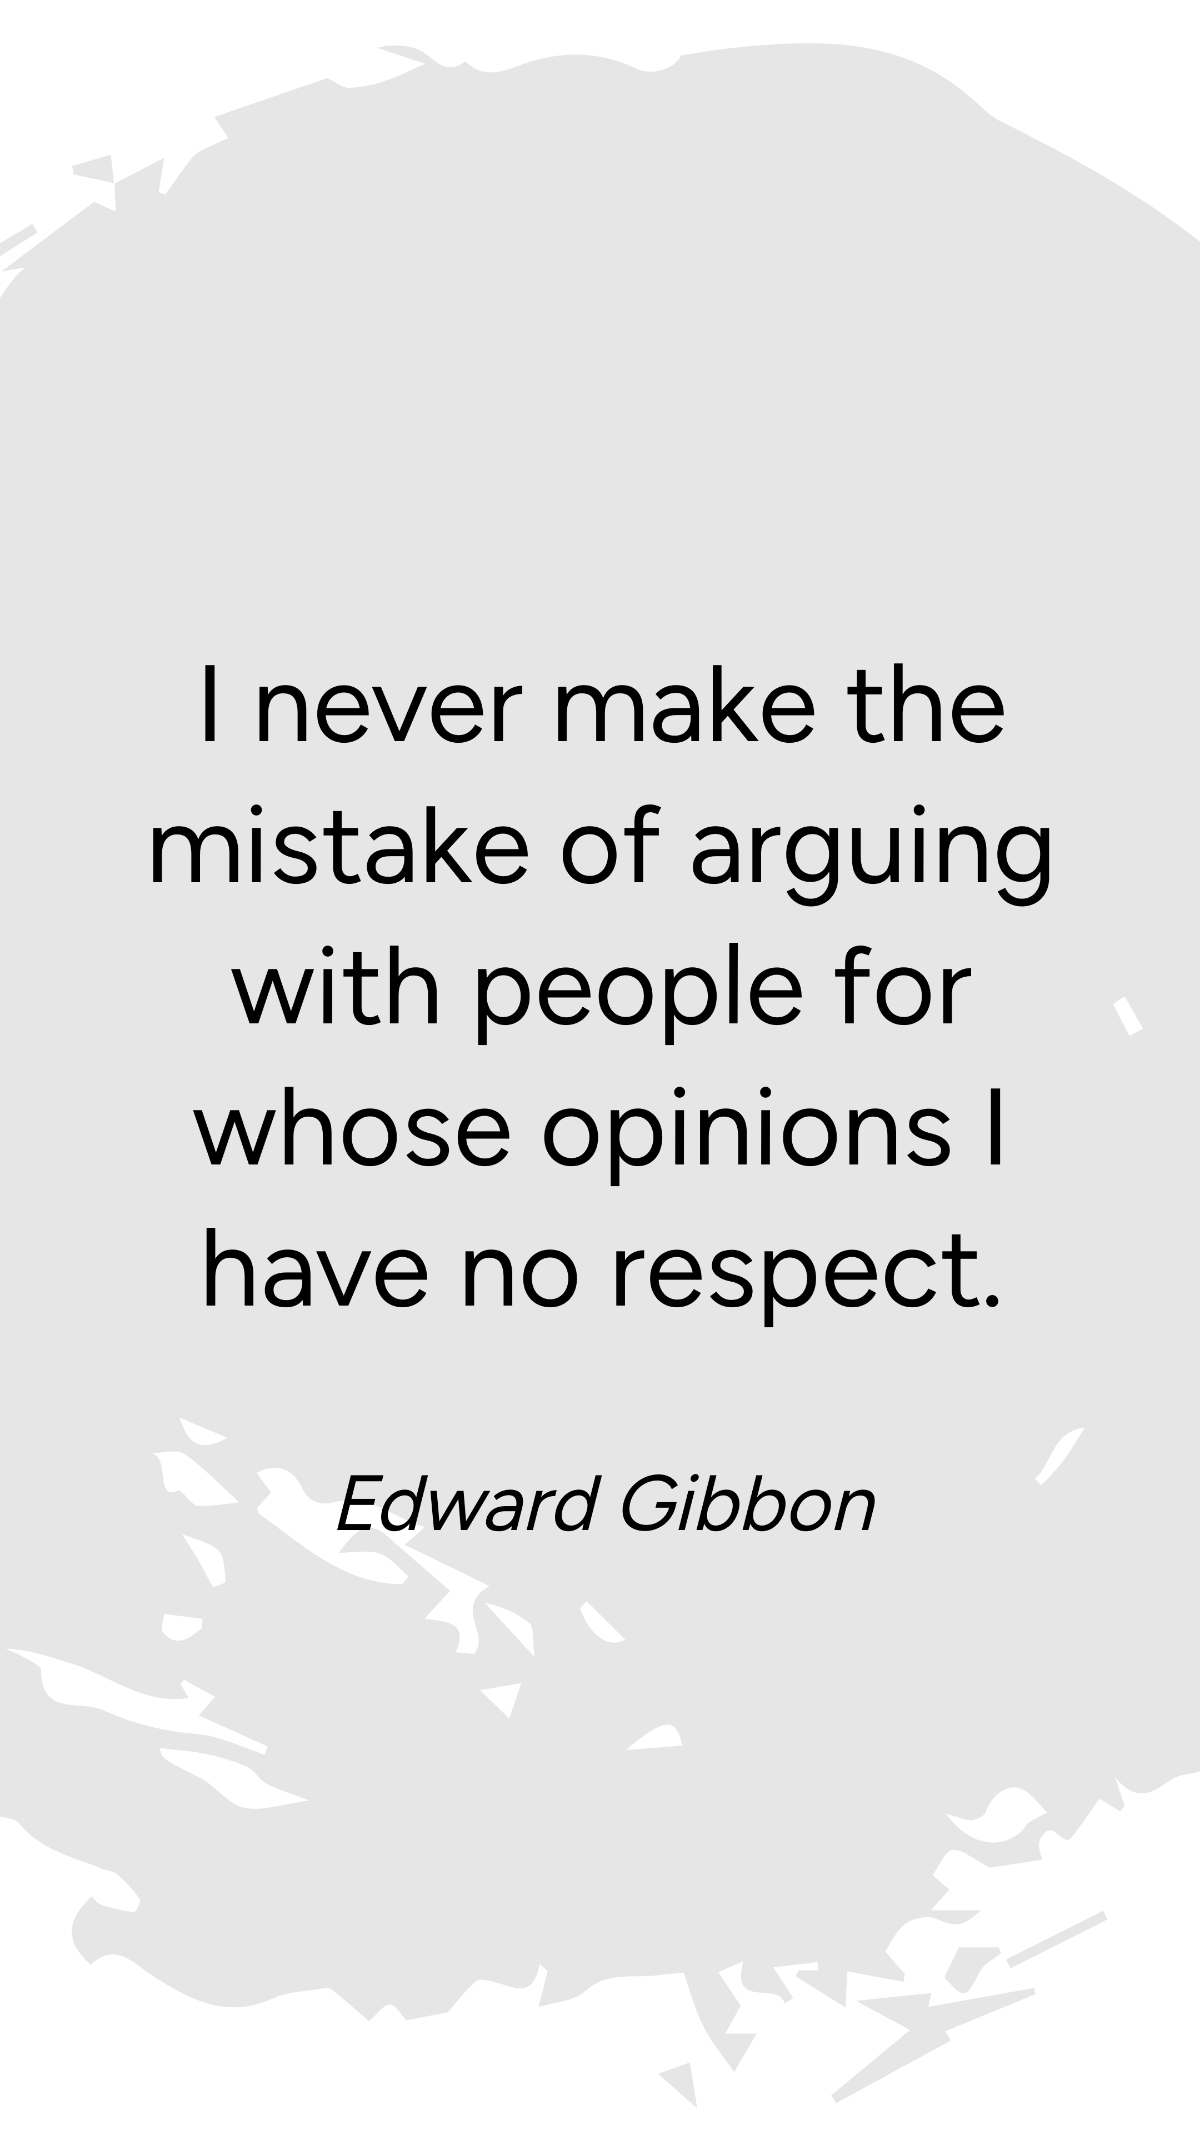 Edward Gibbon - I never make the mistake of arguing with people for whose opinions I have no respect. Template